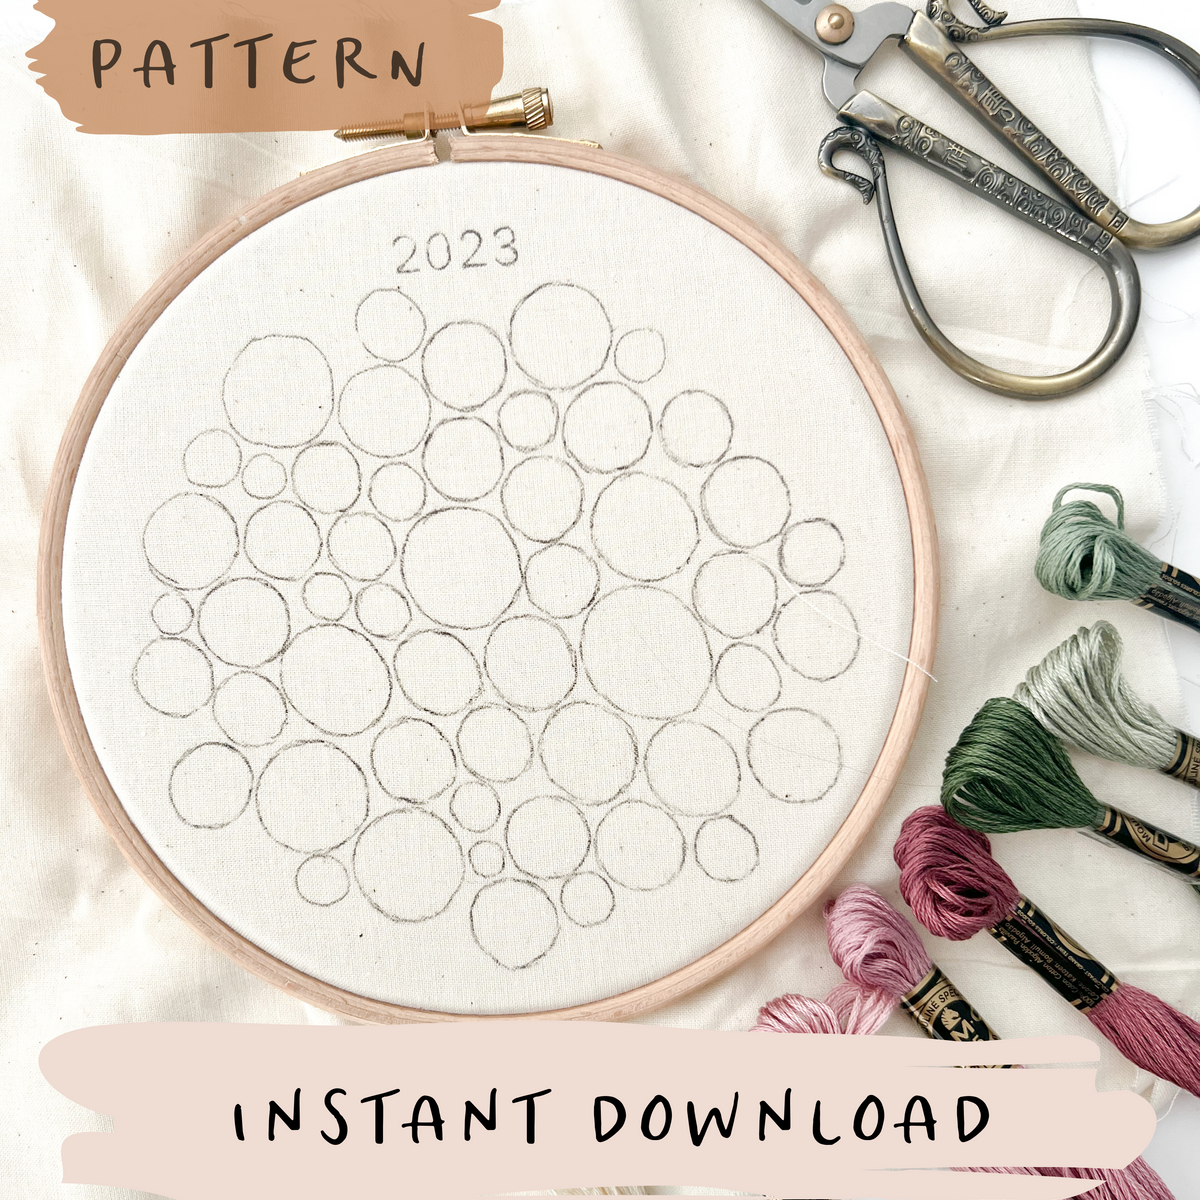 2023 embroidery journal highlights so far: I've taken trips to